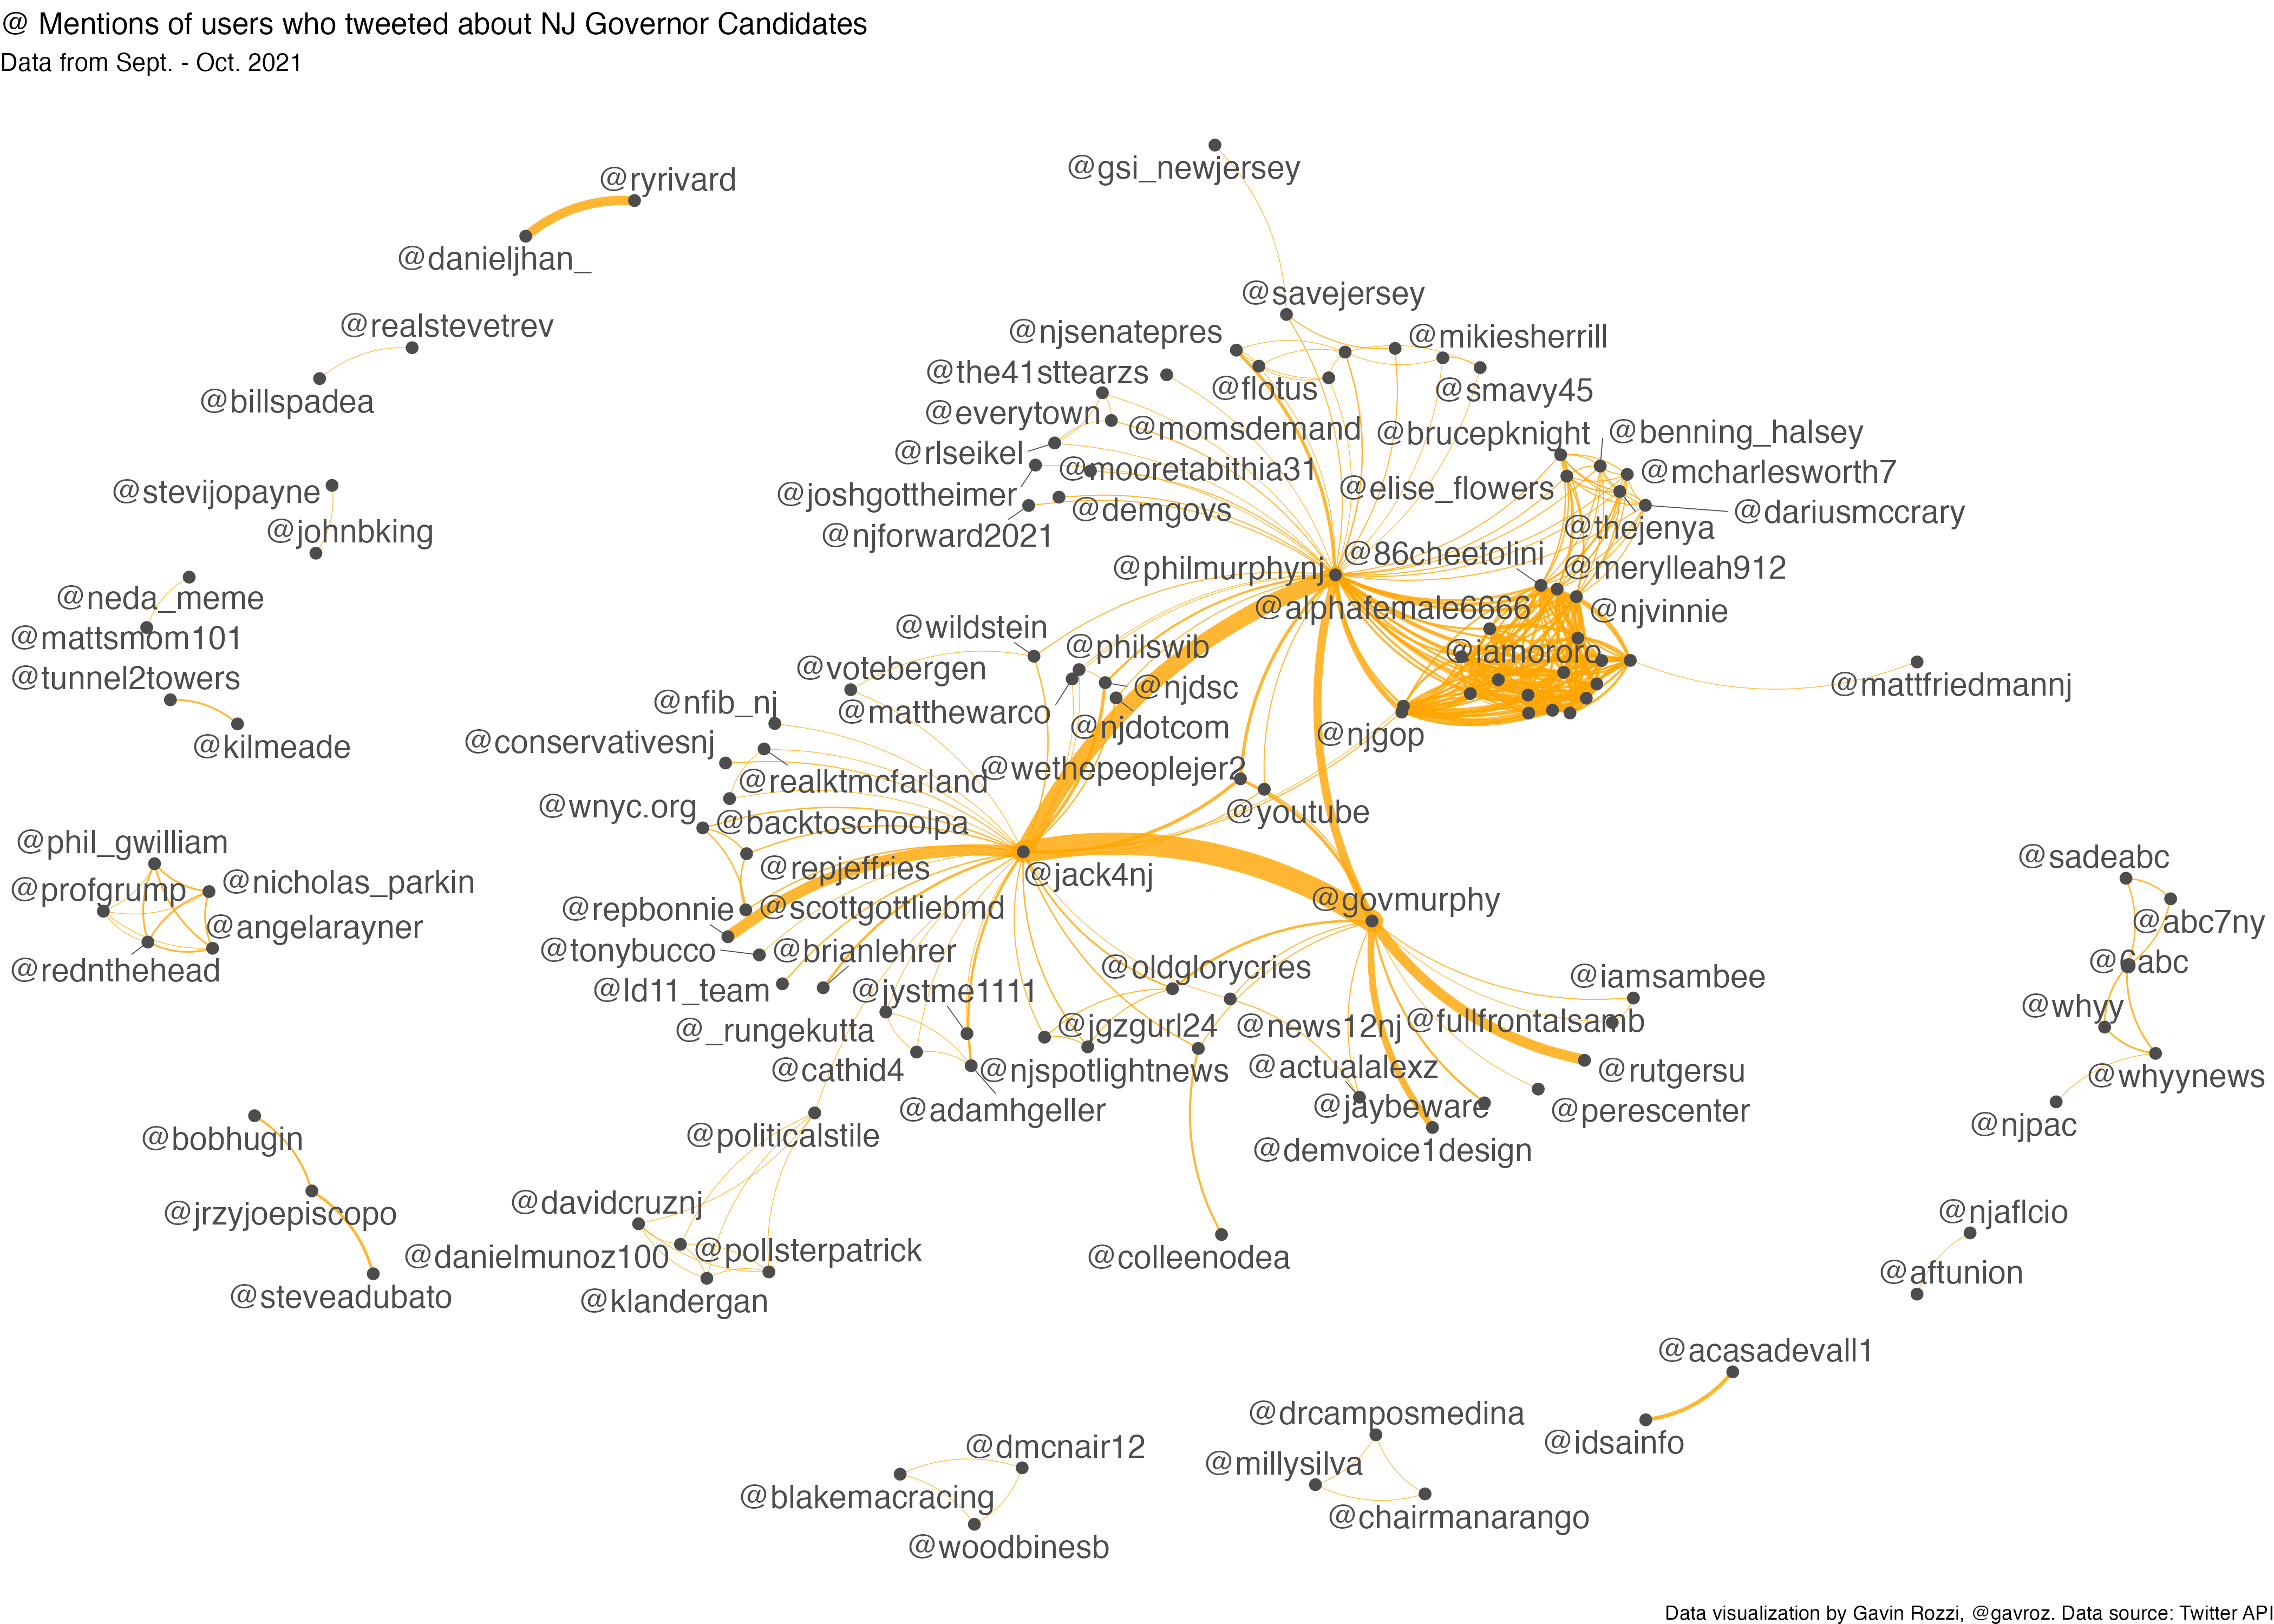 Figure 4: Network diagram of @ mentions in tweets about Phil Murphy and Jack Ciattarelli